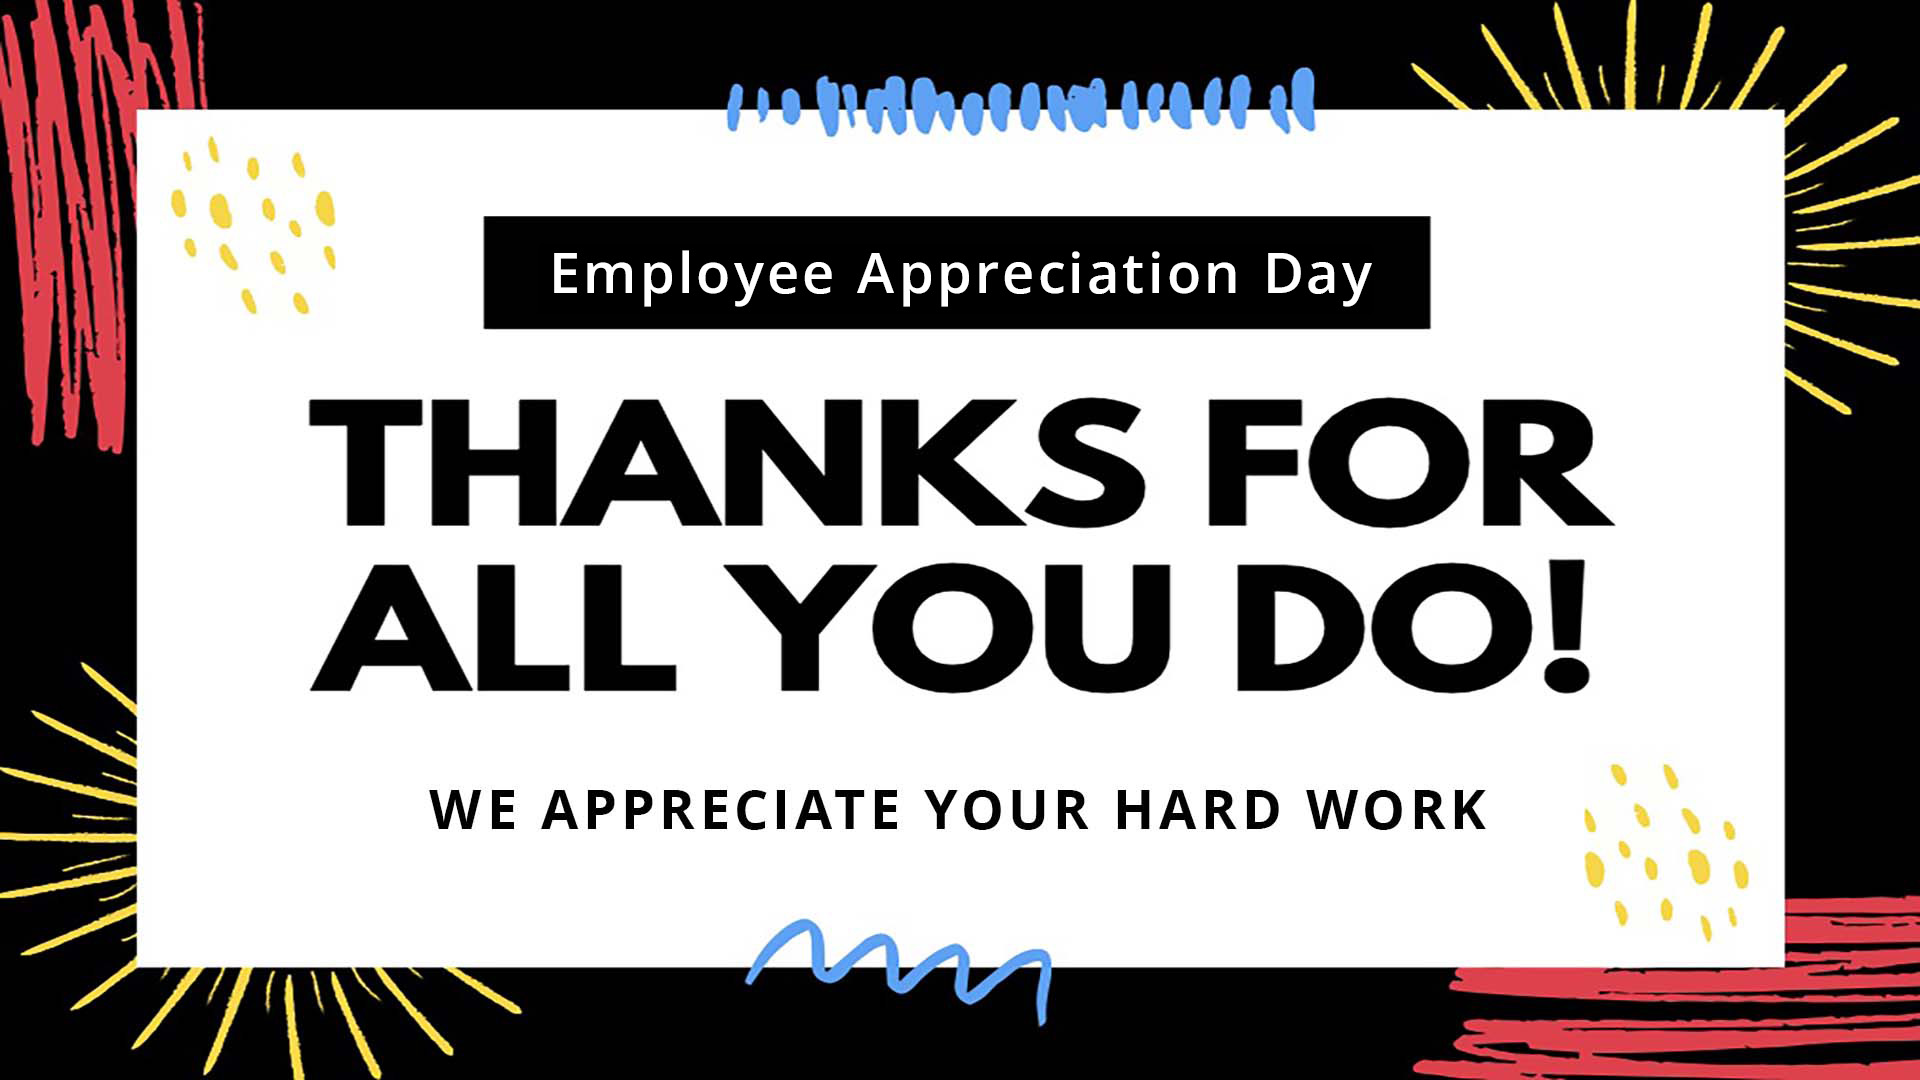 Black Background with drawn colored illustrations. Graphic says Employee Appreciation Day Thanks for all you do! We appreciate your hard work.